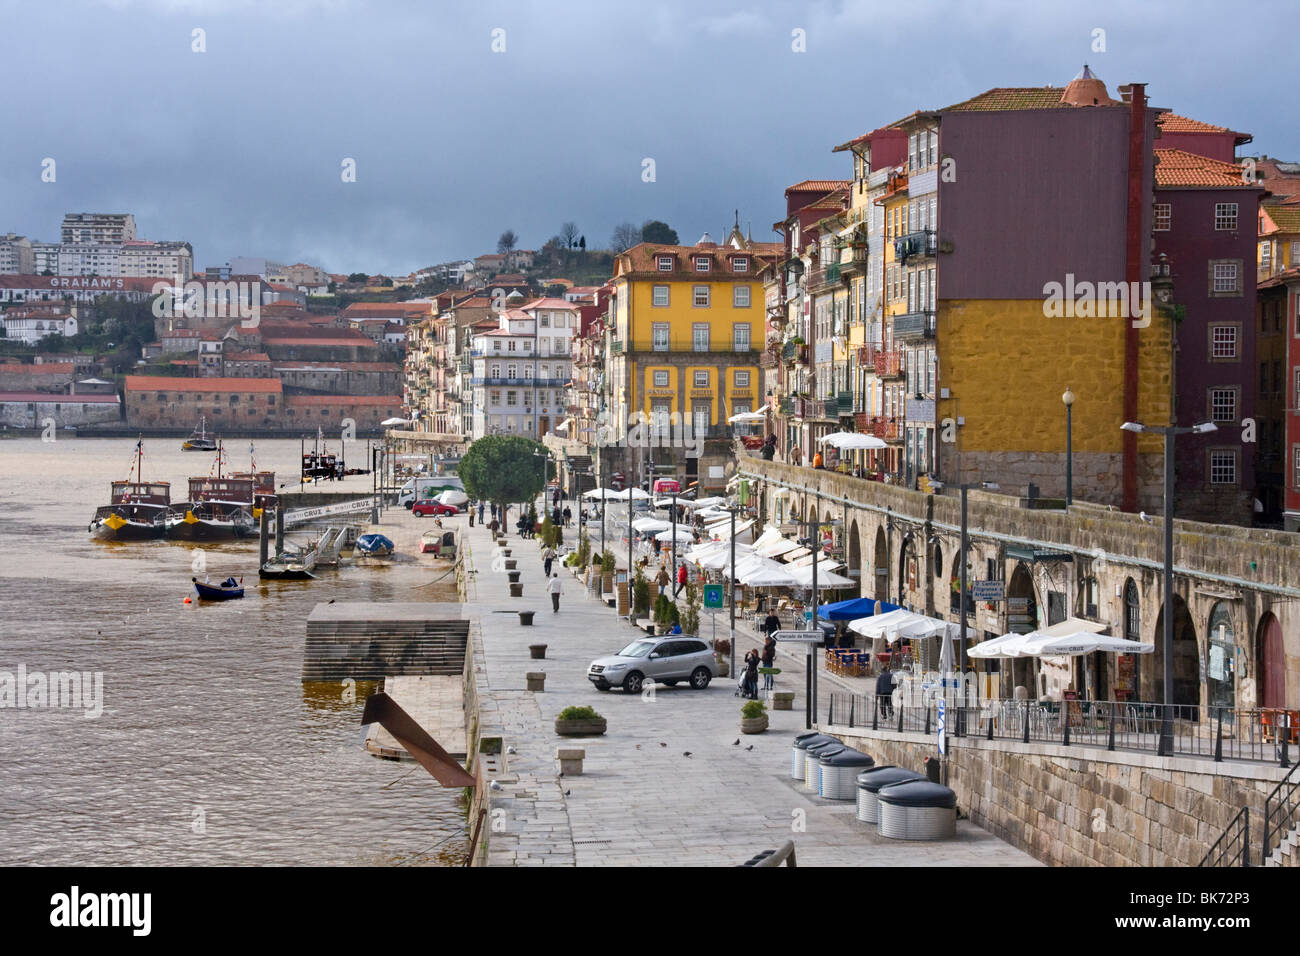 Sidewalk Cafes on Ribeira Riverfront,  city of Porto (also known as Oporto) a UNESCO World Heritage Site, north Portugal Stock Photo